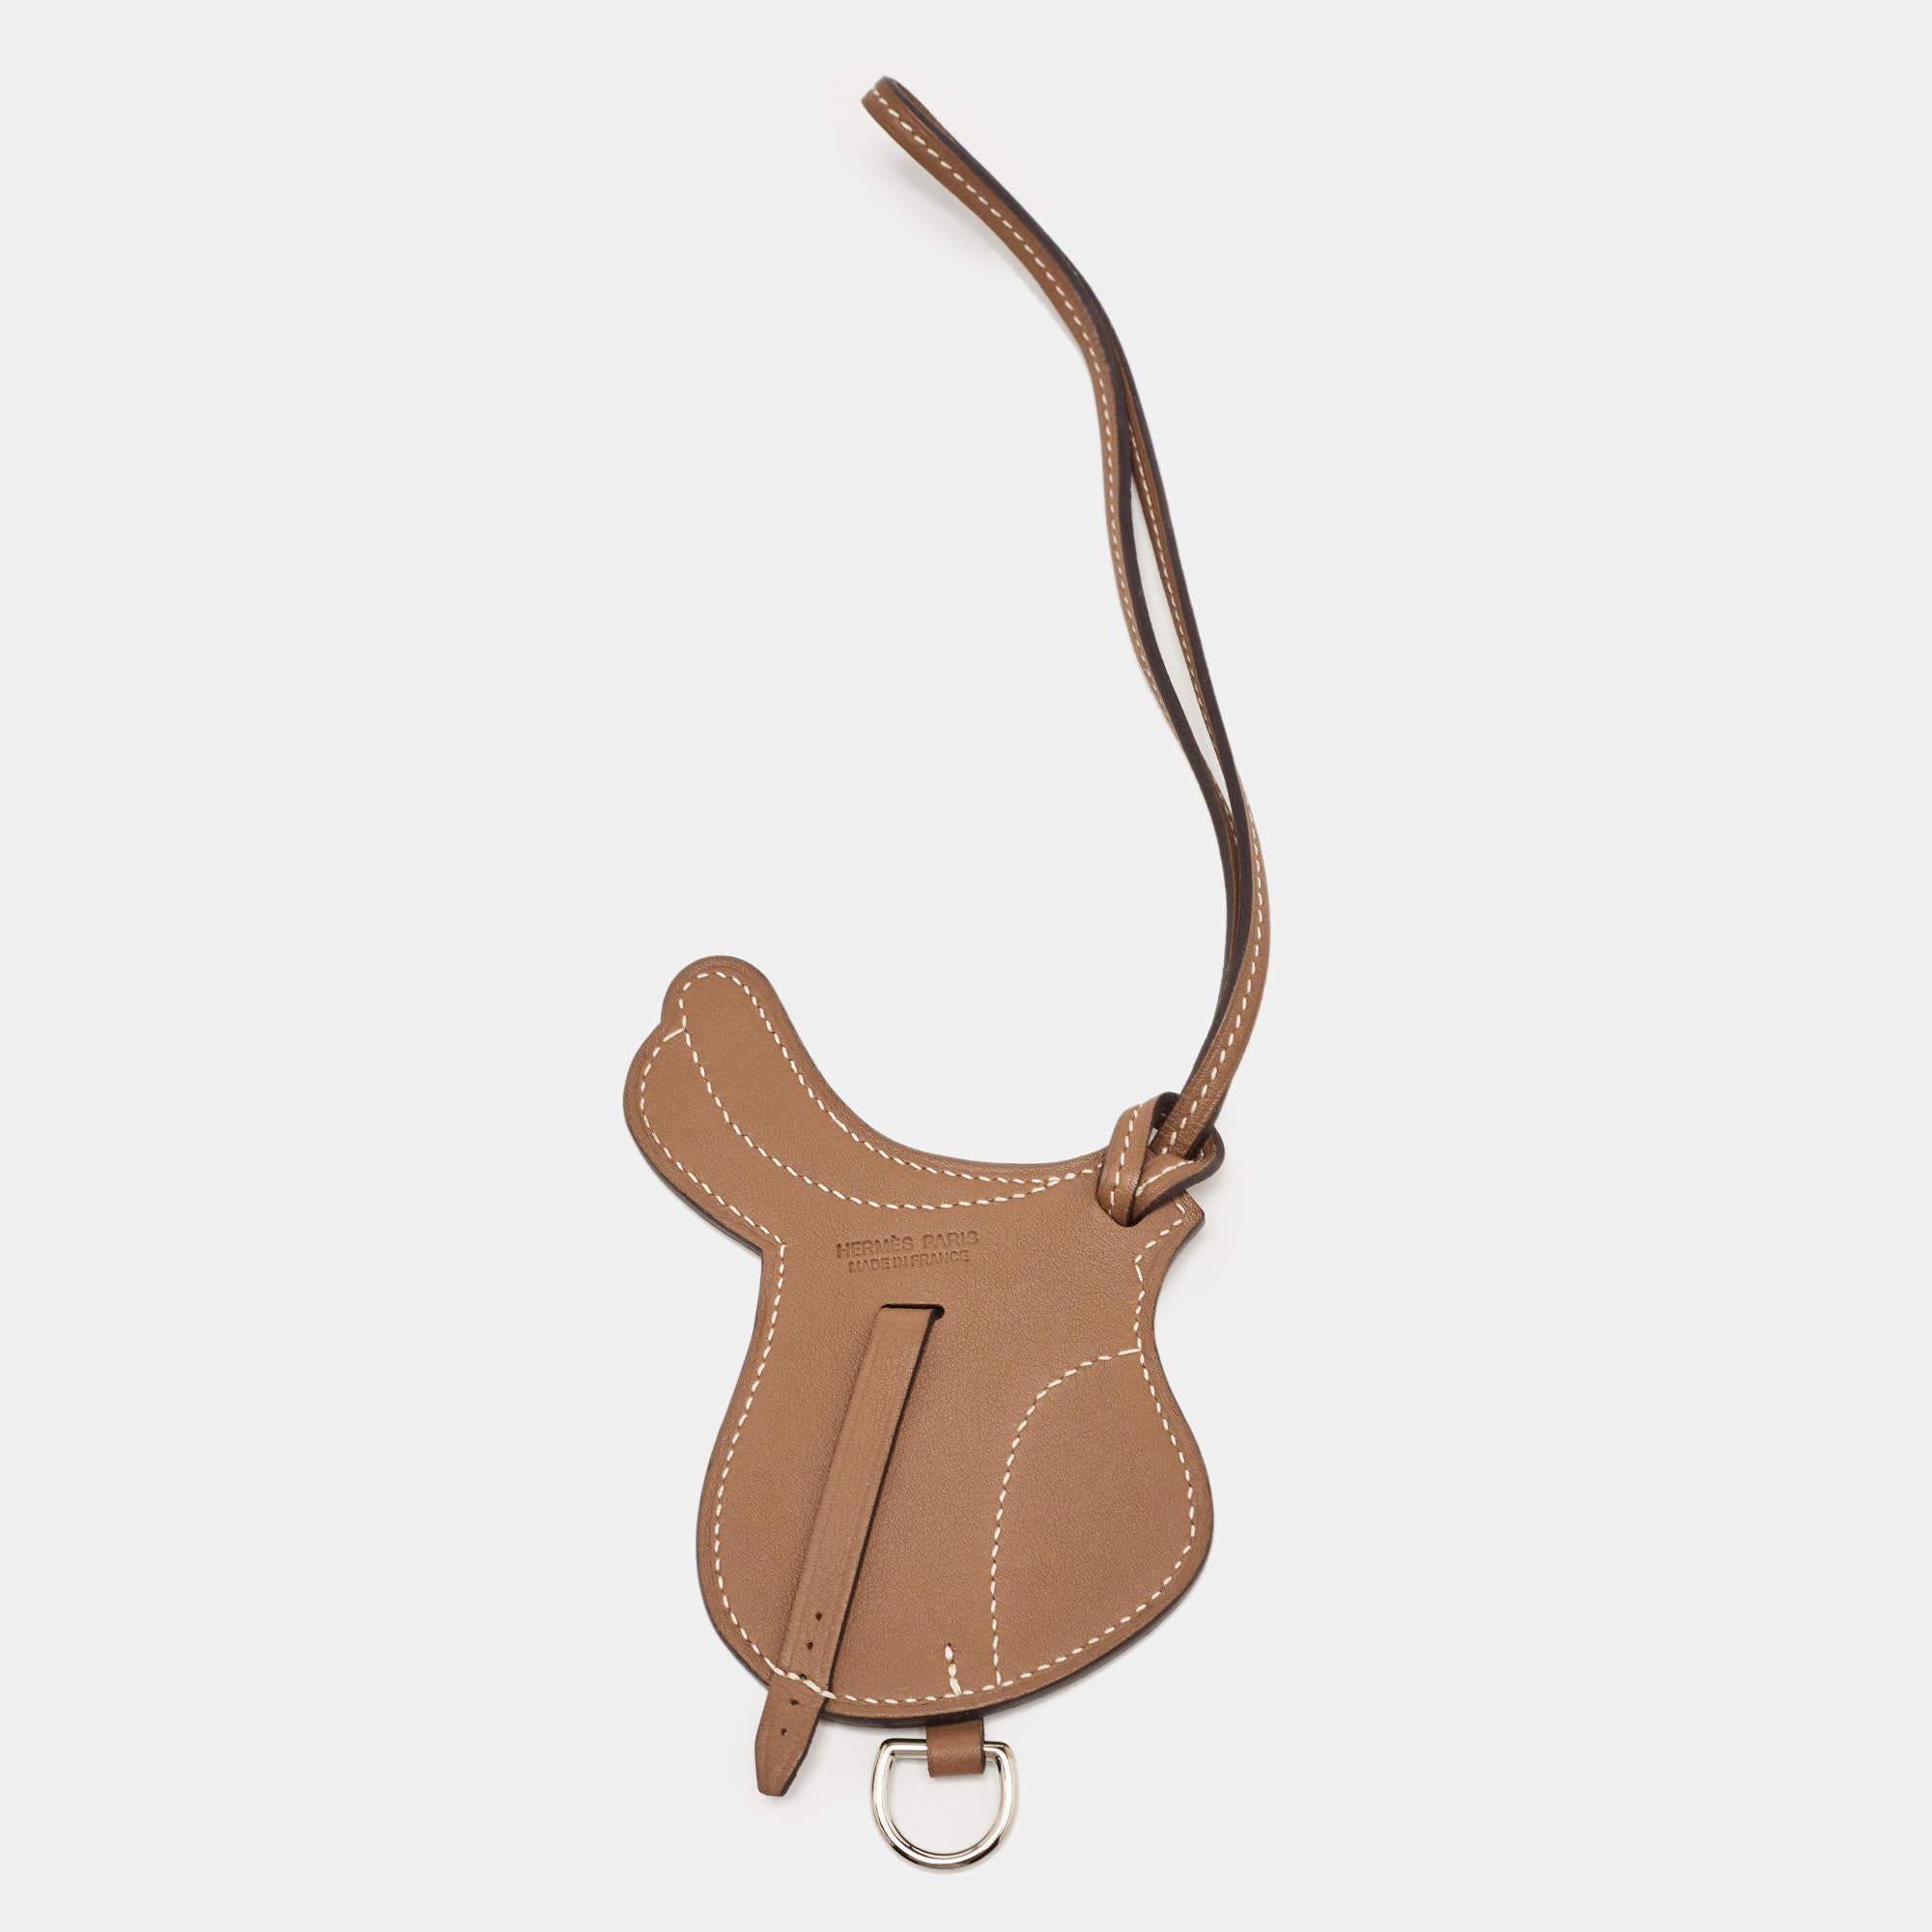 The Hermès Paddock Selle bag charm is an exquisite accessory crafted from luxurious Swift Leather. Its design features a luxe shade. This charming piece perfectly complements any Hermès bag, adding a touch of elegance and sophistication.

